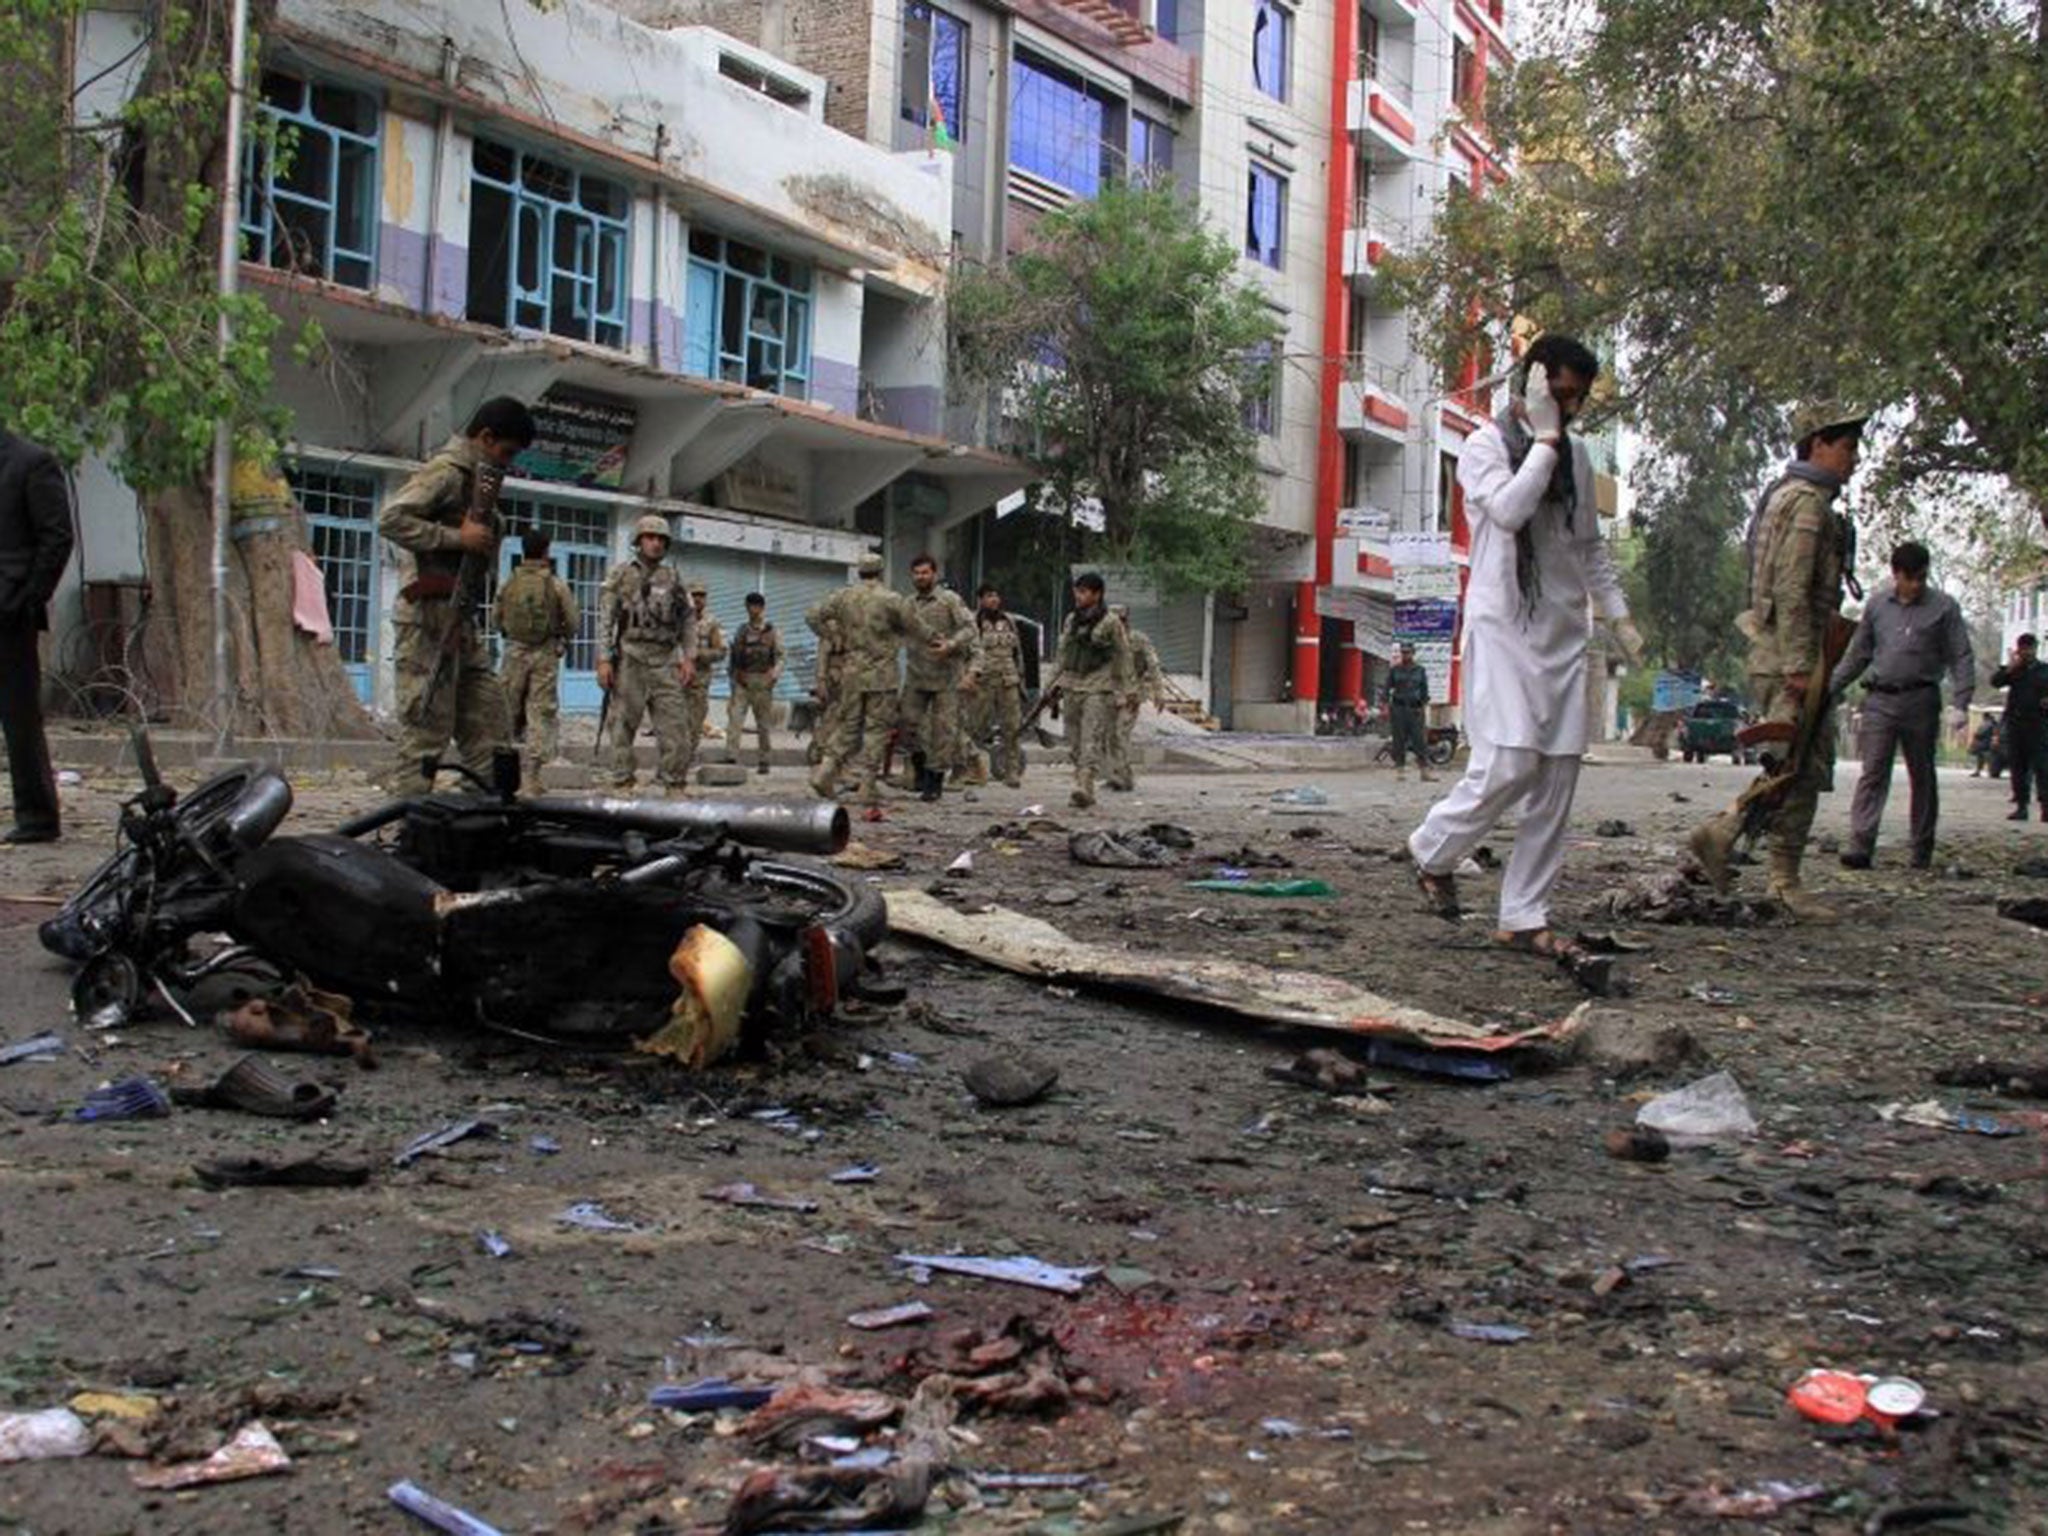 Police inspect the scene of the suicide bombing in Jalalabad on 18 April